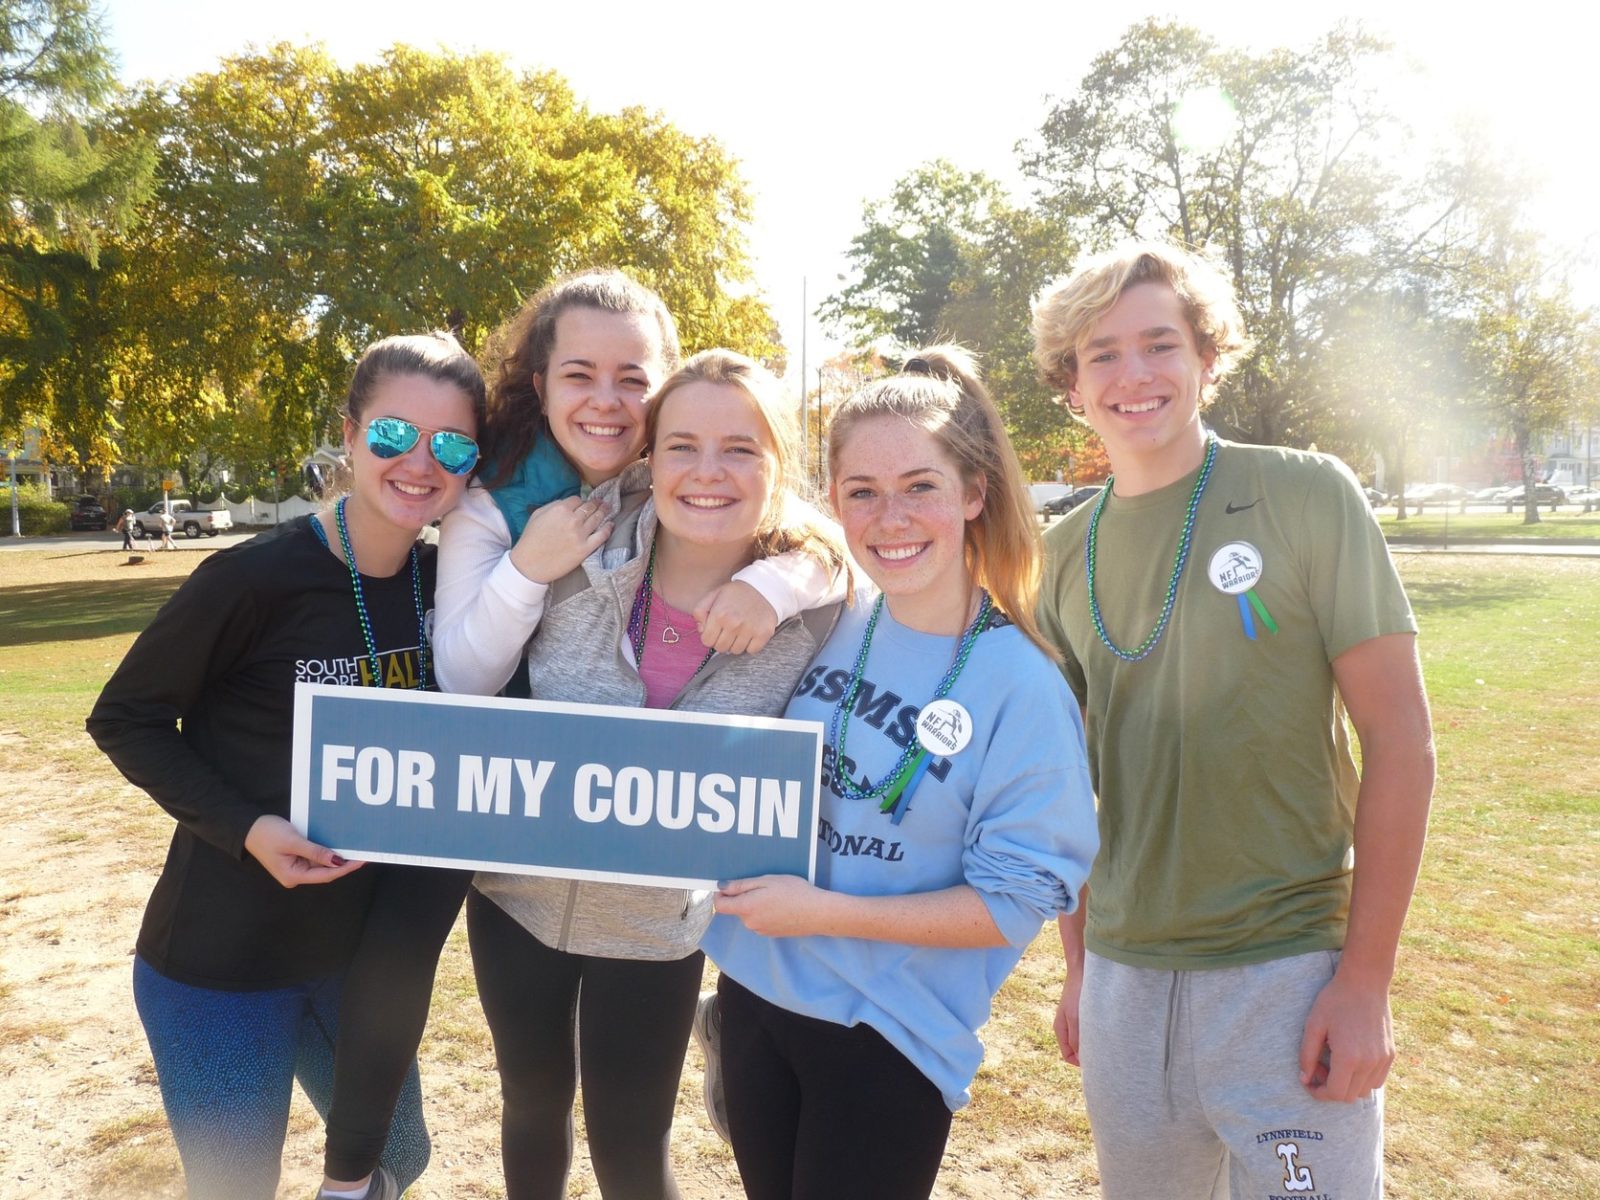 group of teens at wakefield steps2cure walk, holding "for my cousin" sign